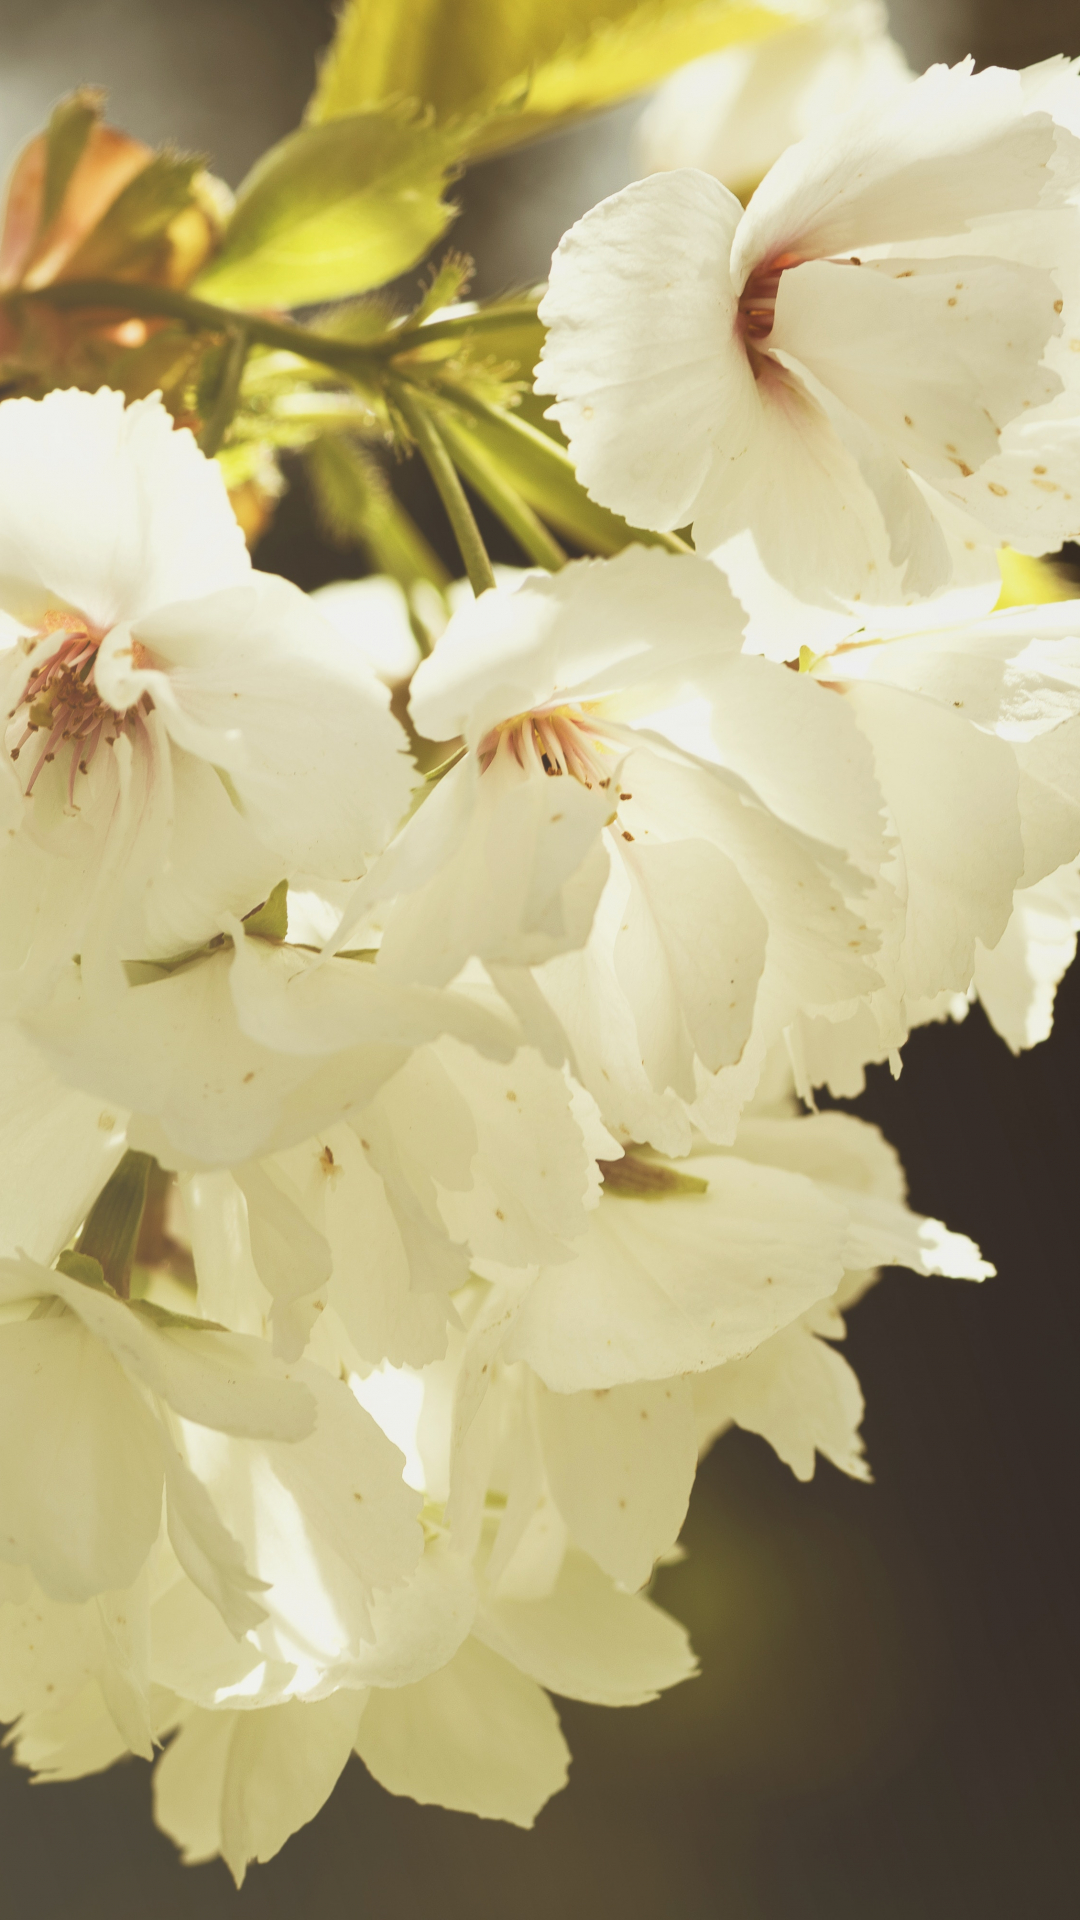 White Blossom Clump iPhone Wallpaper